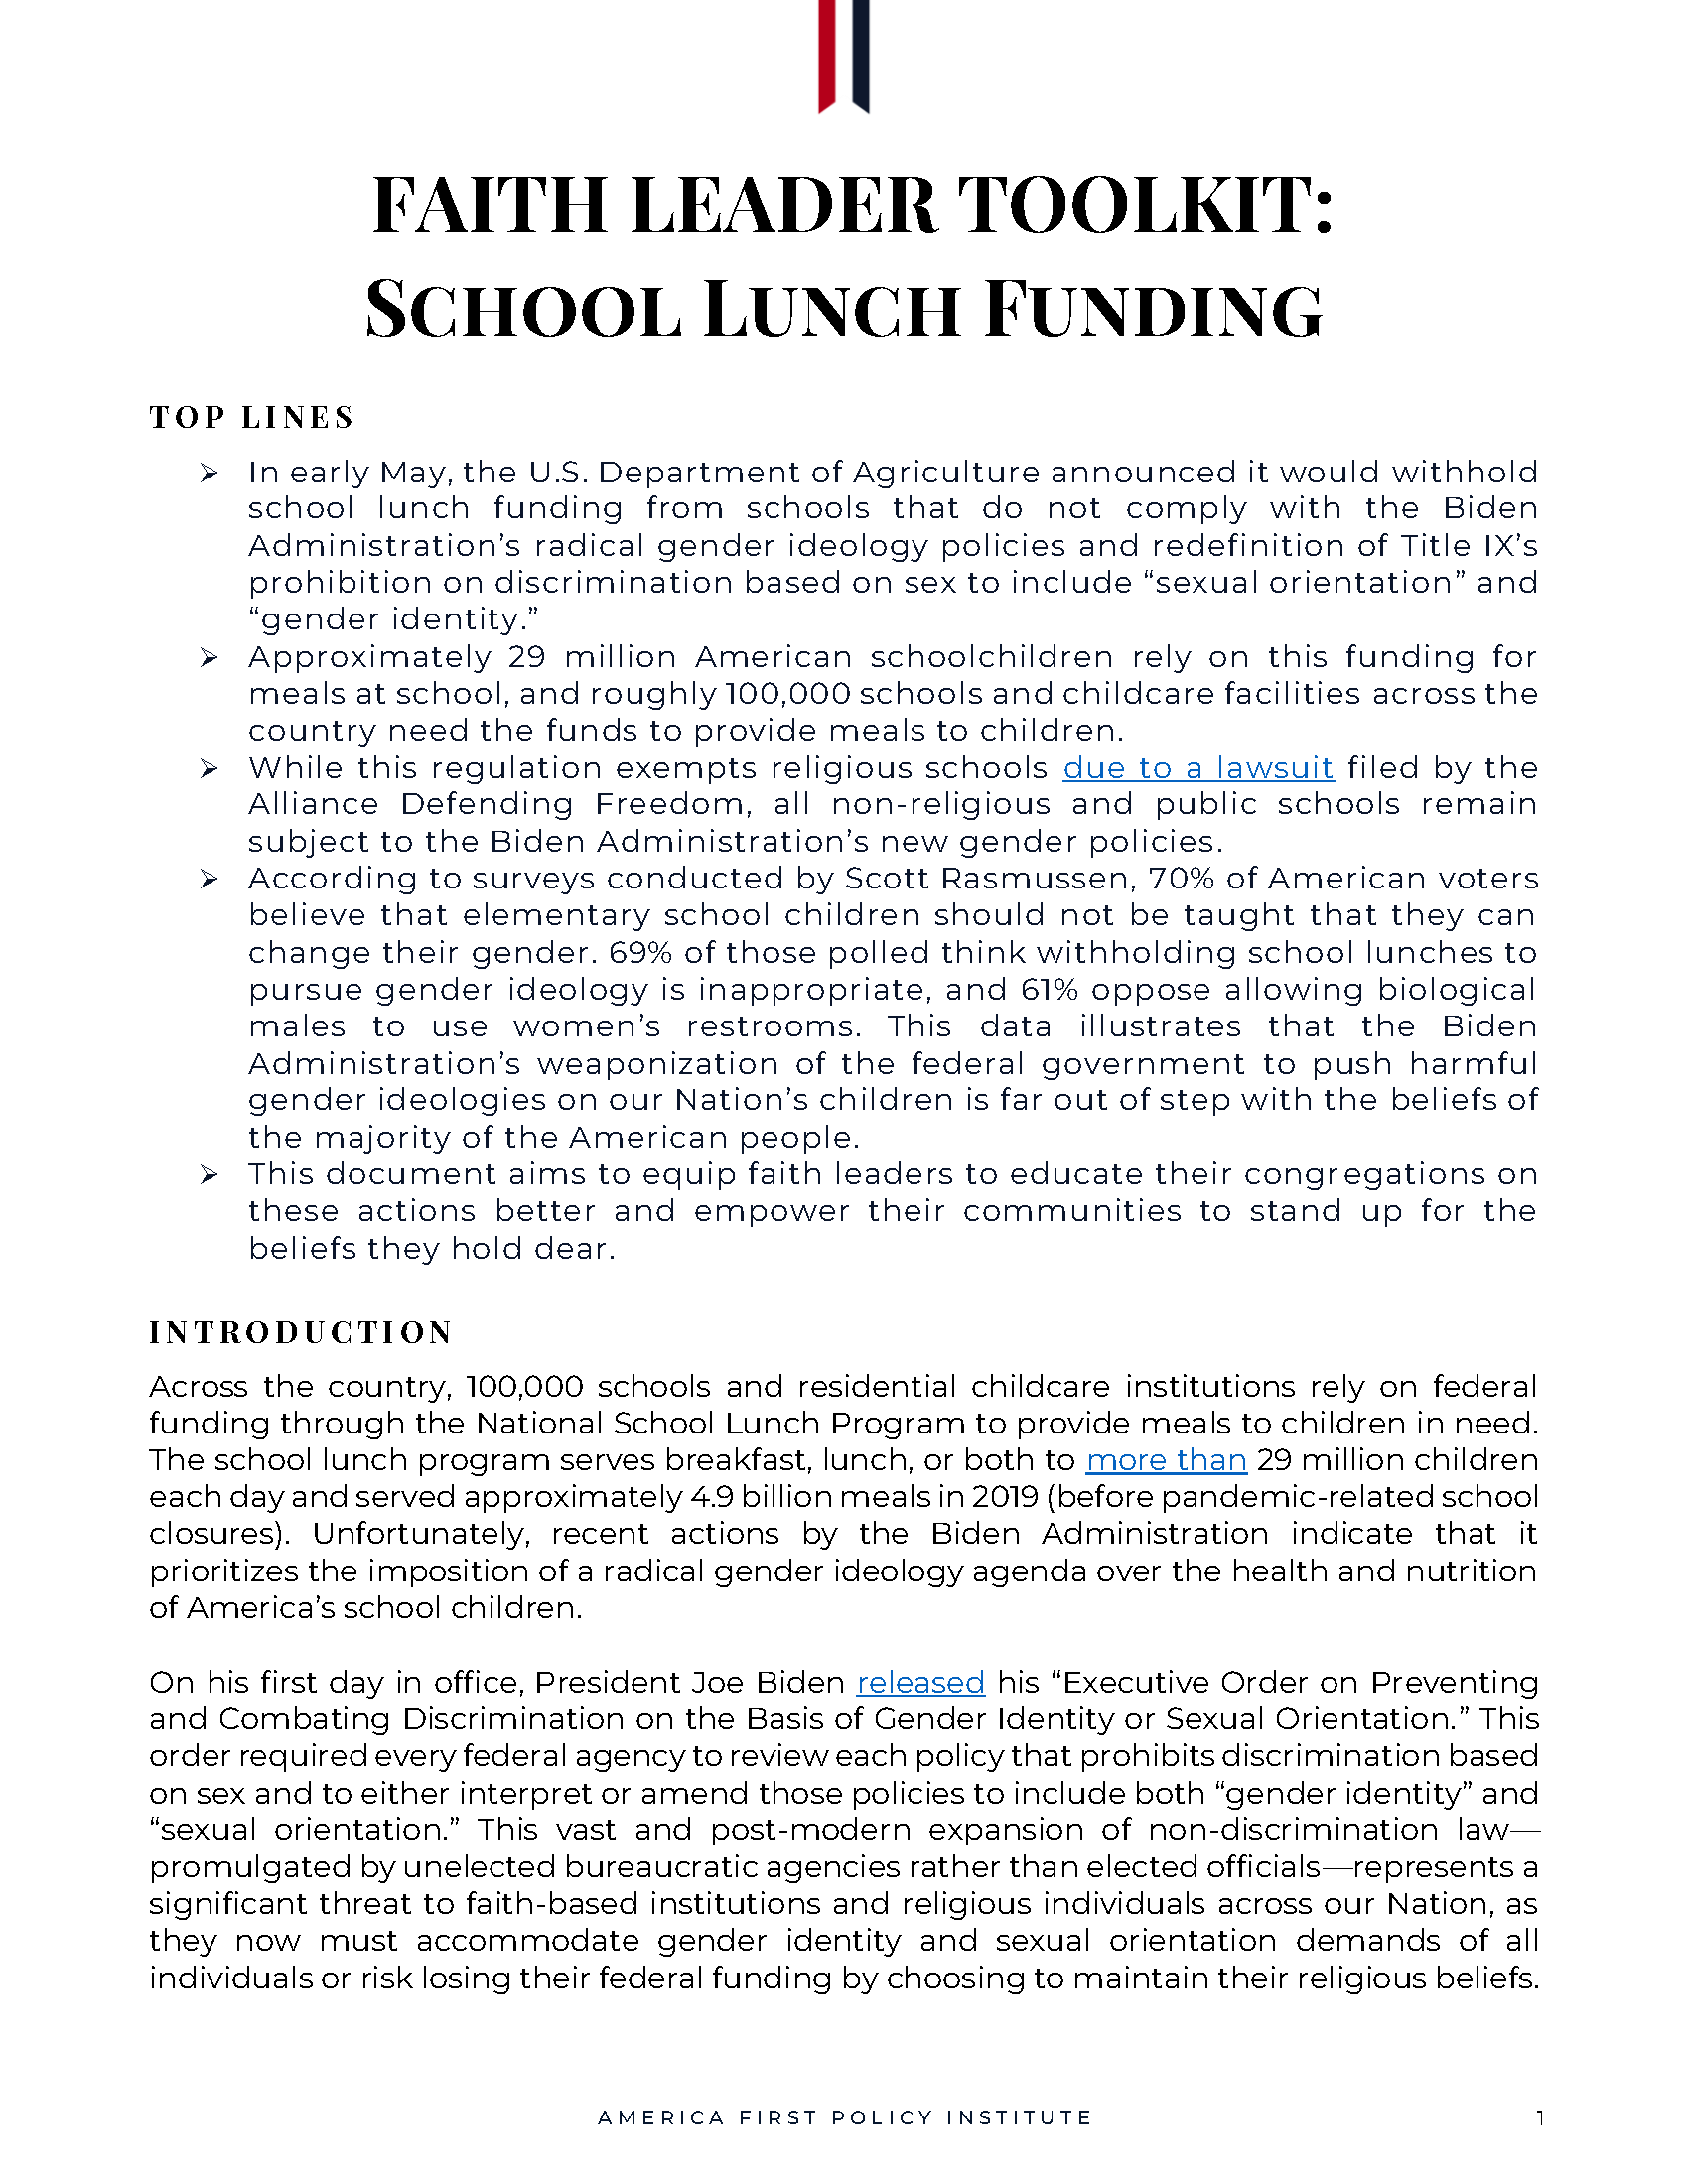 Faith Leader Toolkit School Lunch Funding photo pic